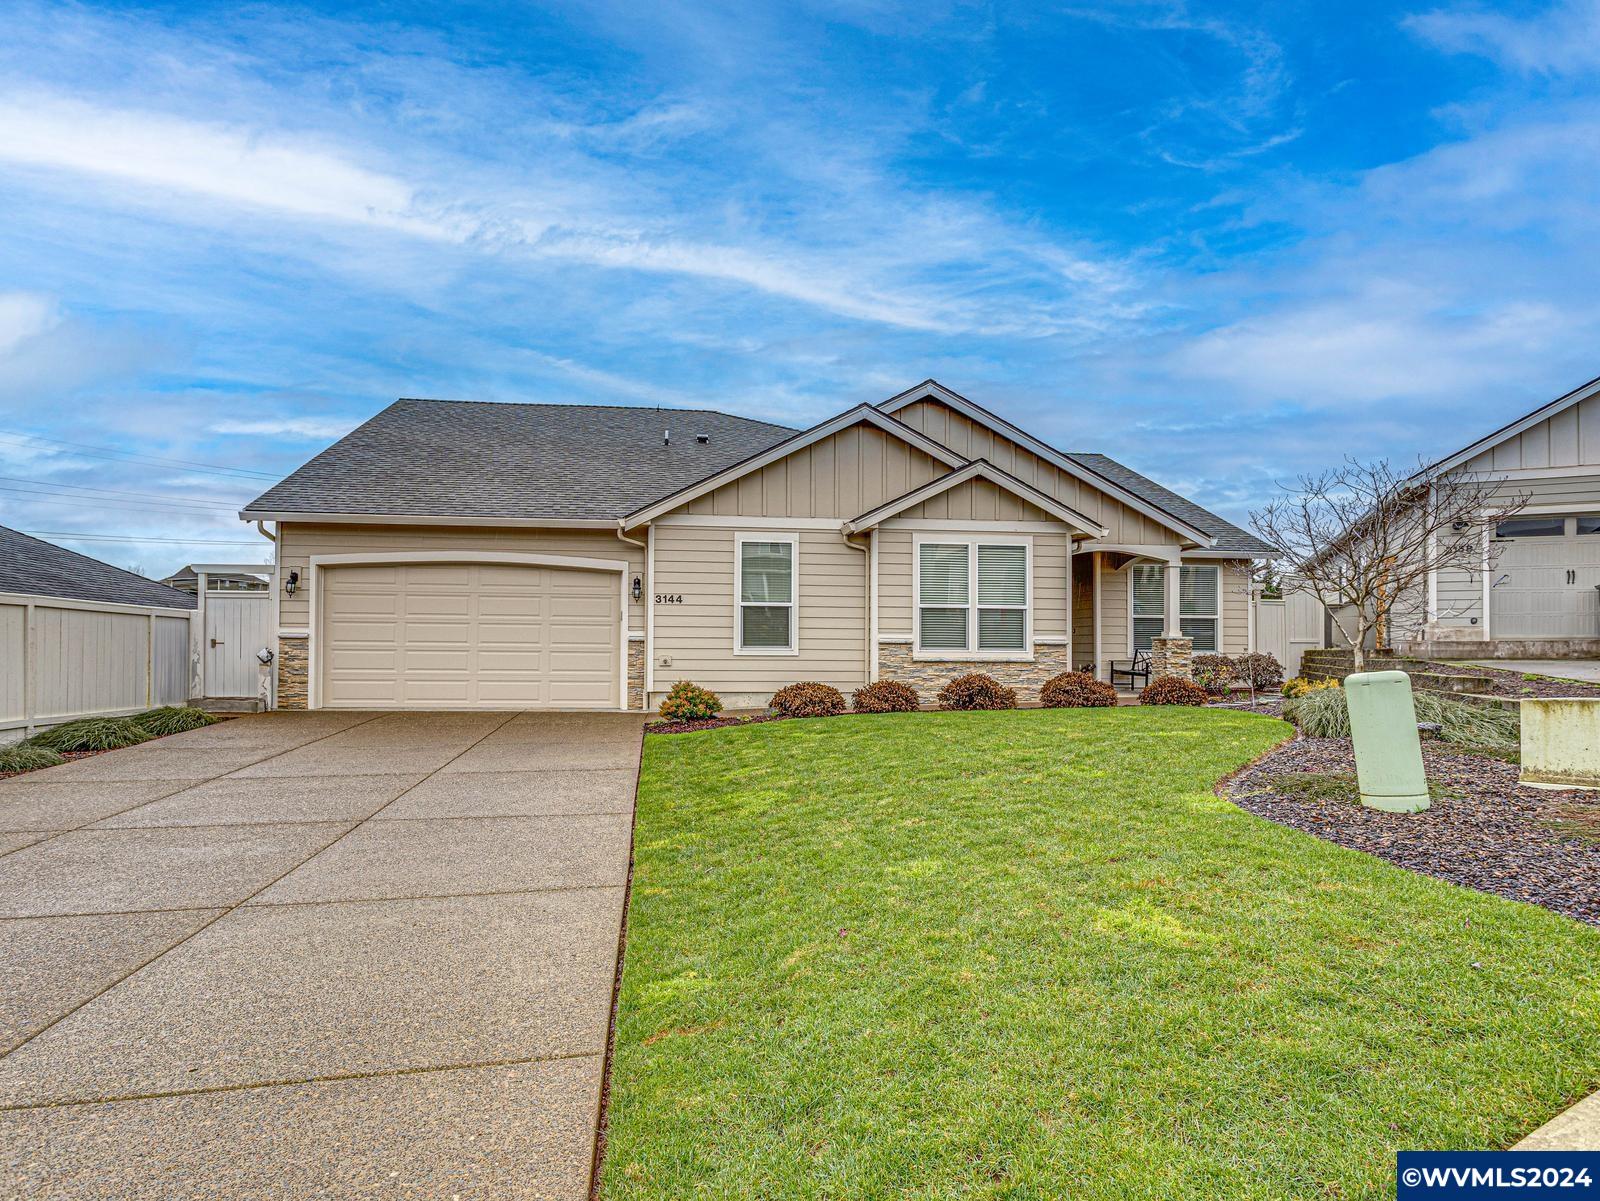 3144 Eagle Ray Ct NW, Salem, OR 97304